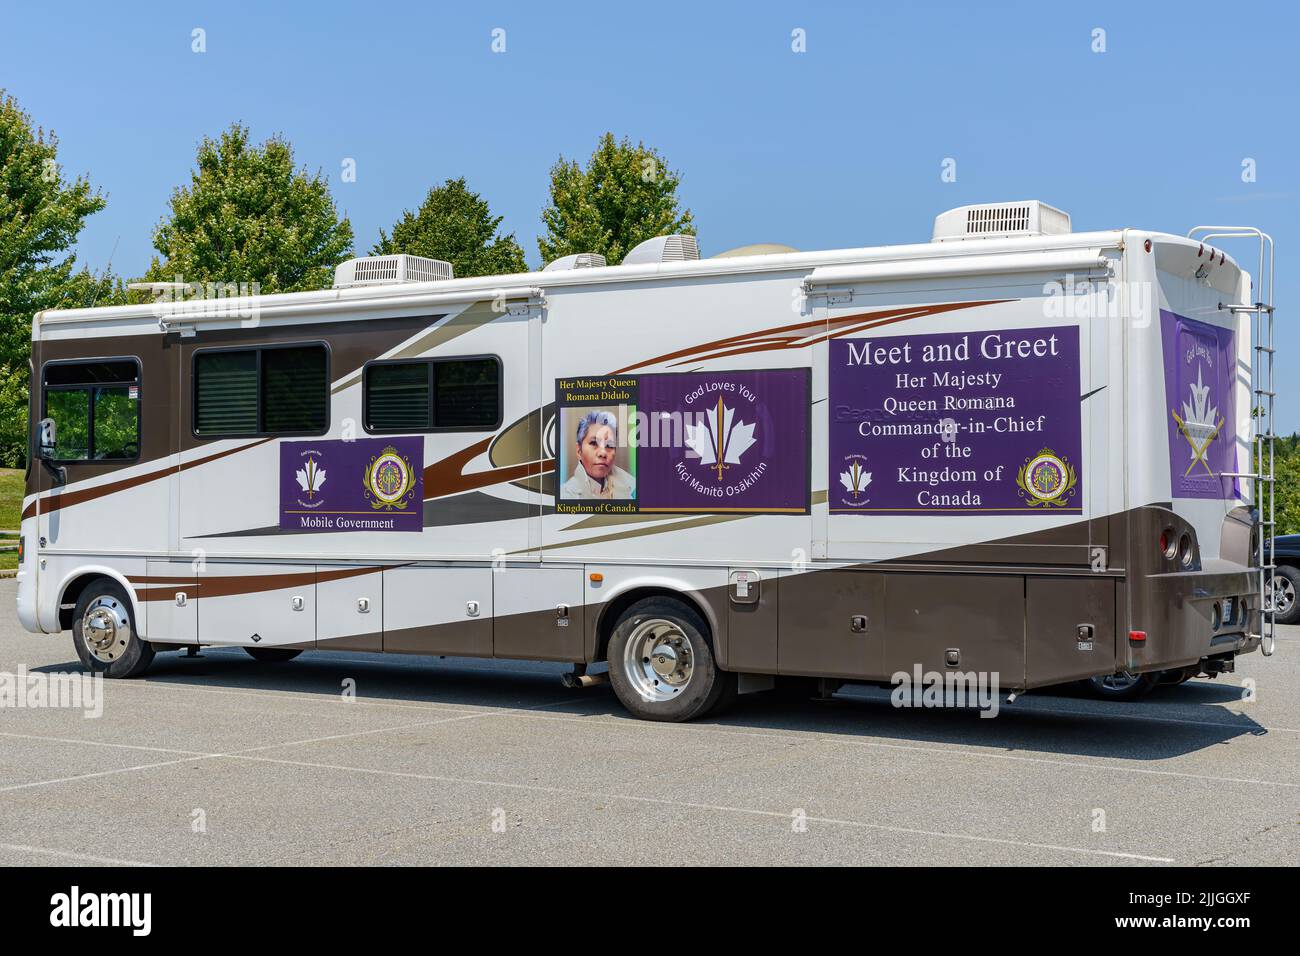 Saint John, NB, Canada - July 17, 2022: Mobile Government vehicle for Romana Didulo, self proclaimed Queen of Canada, during her visit to the area. Stock Photo